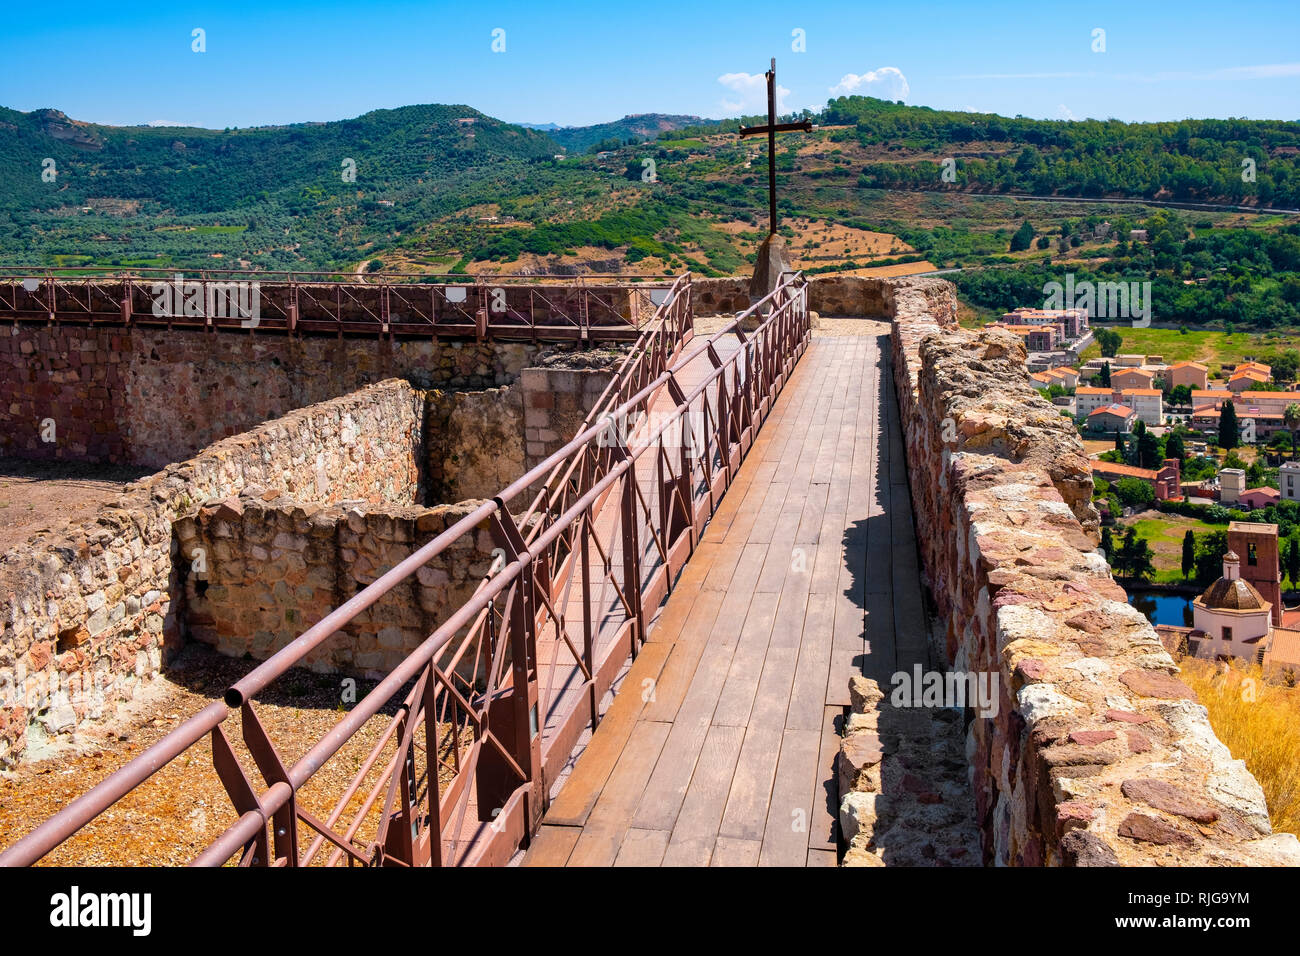 Bosa, Sardinia / Italy - 2018/08/13: Malaspina Castle, known also as Castle of Serravalle, with monumental historic defense walls and fortification Stock Photo